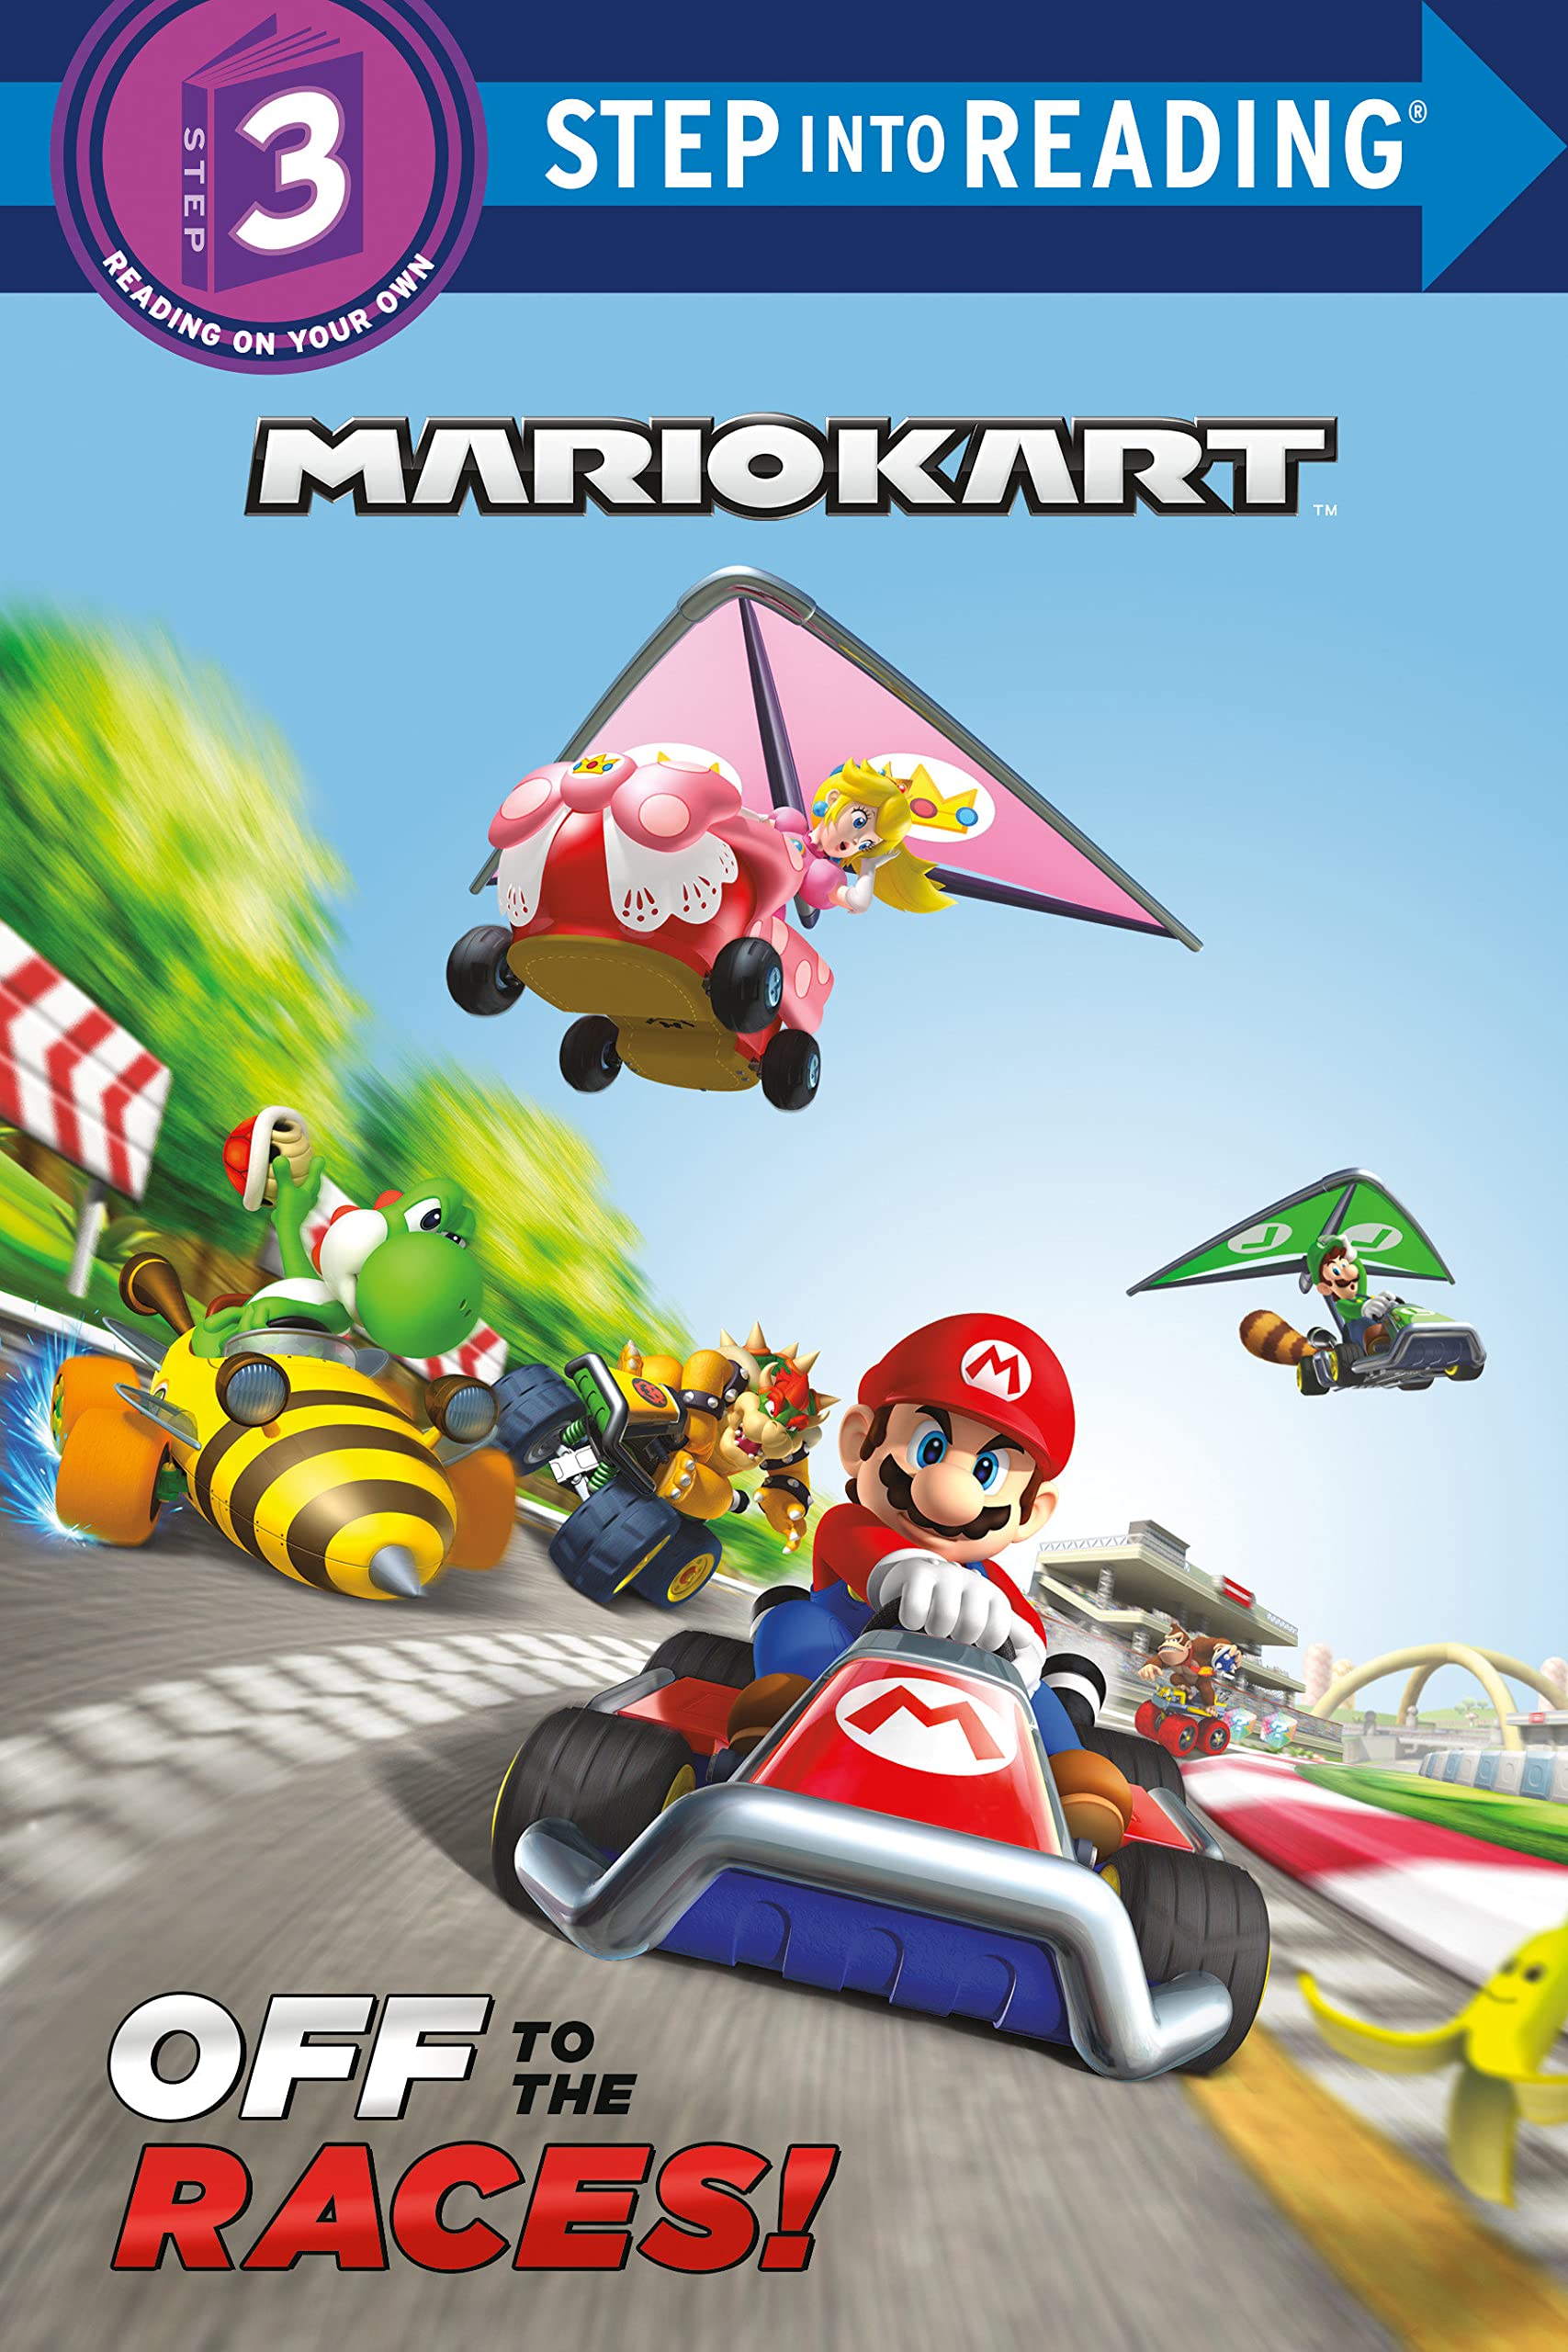 Off to the Races! (Nintendo® Mario Kart) (Step into Reading)